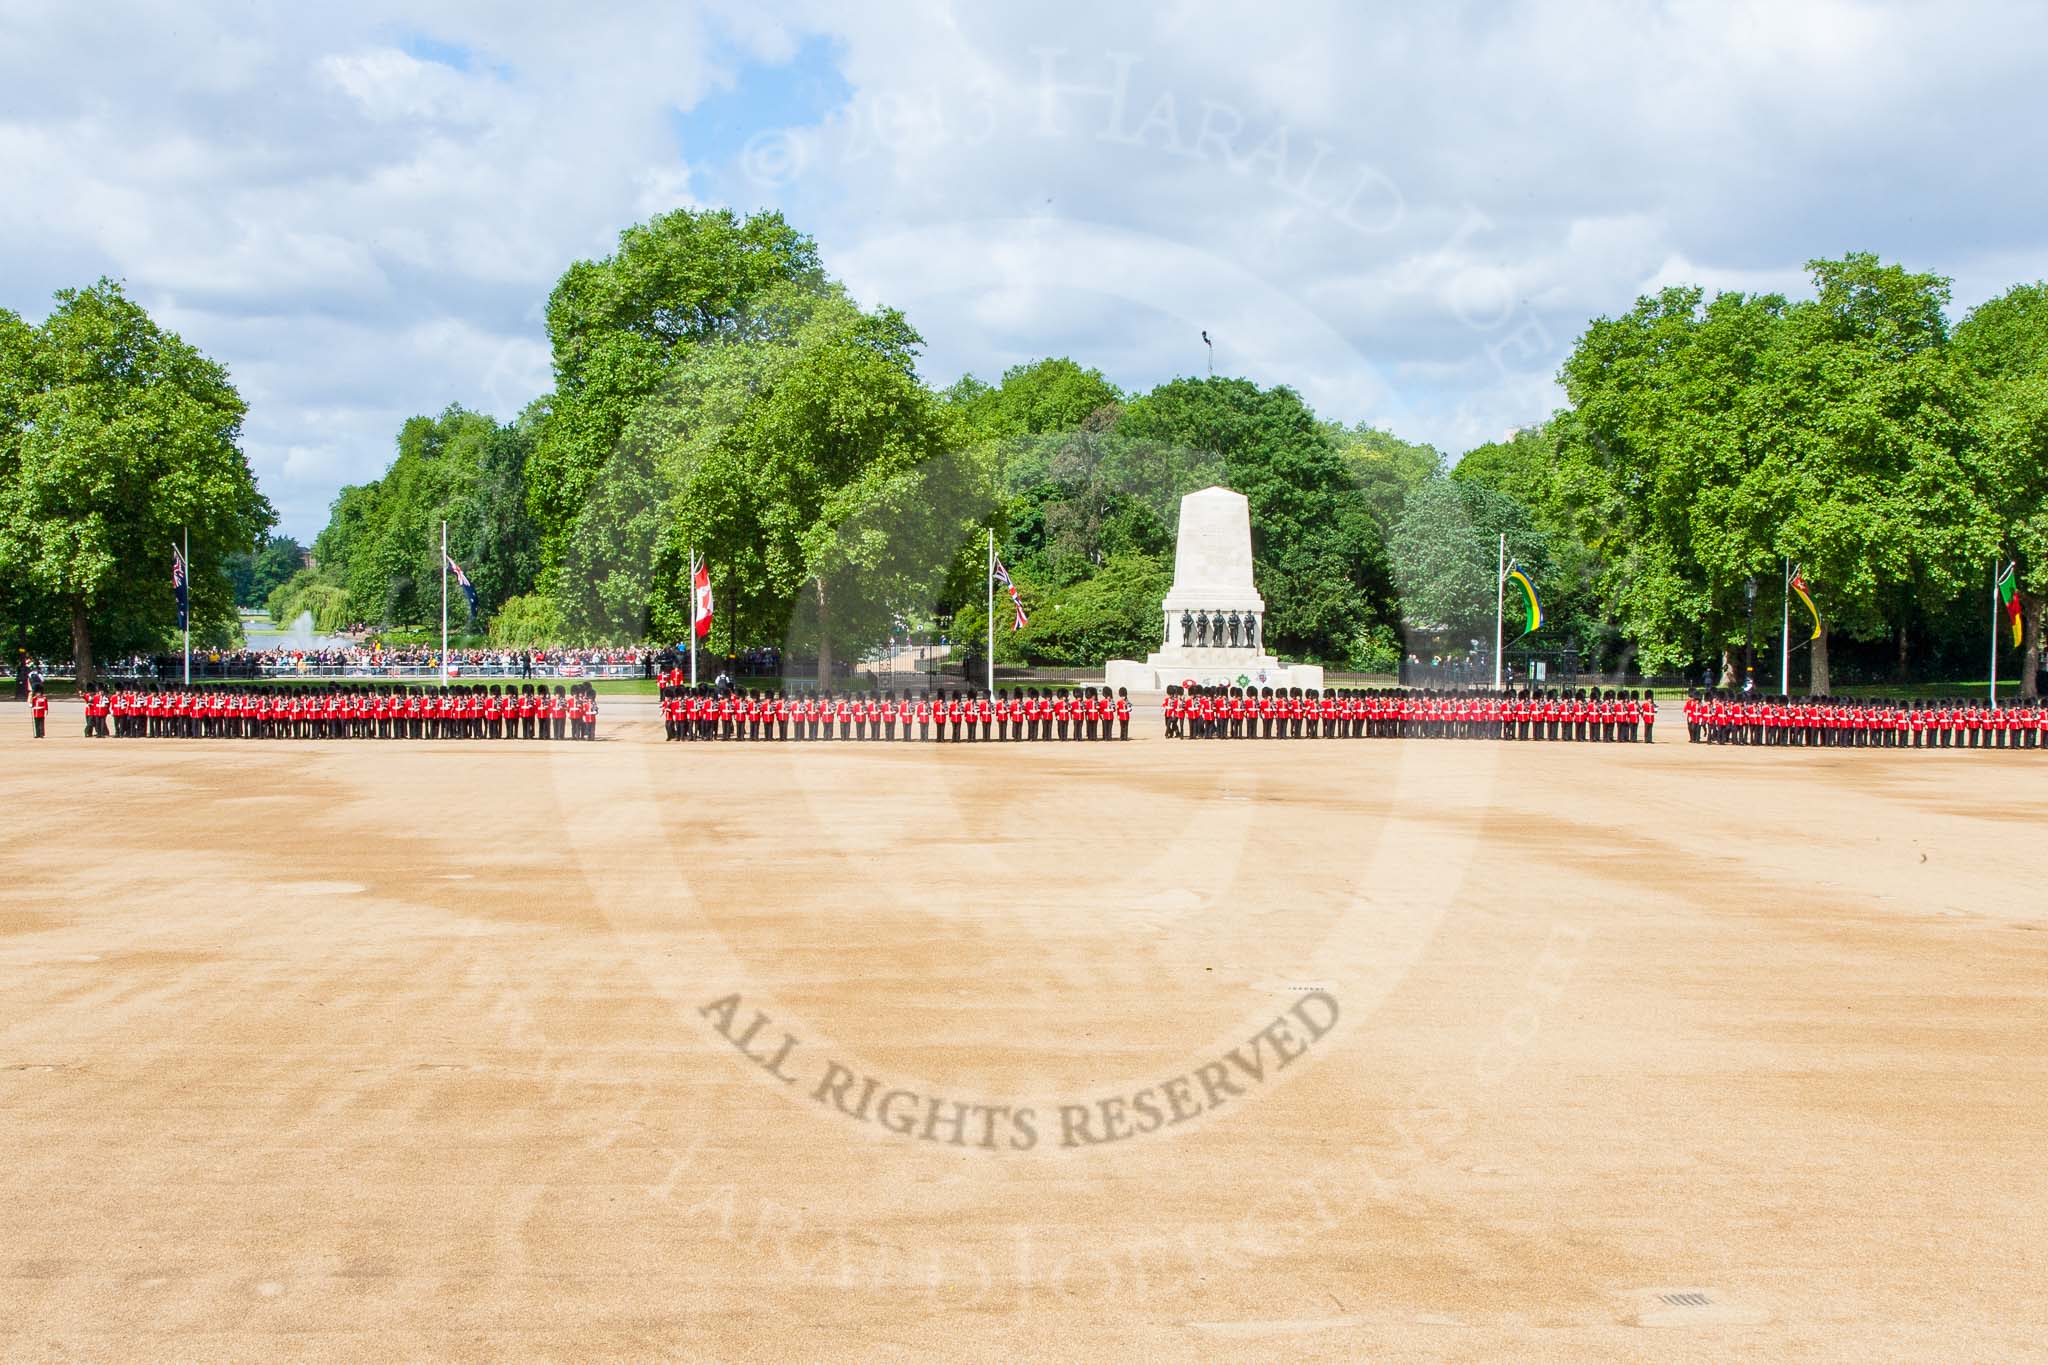 Trooping the Colour 2013: A wide angle overview of Horse Guards Parade - from left to right, No. 1 to No. 4 Guard. Behind No. 1 Guard St. James's Park Lake, behind No. 3 Guard the Guards Memorial. Image #133, 15 June 2013 10:36 Horse Guards Parade, London, UK